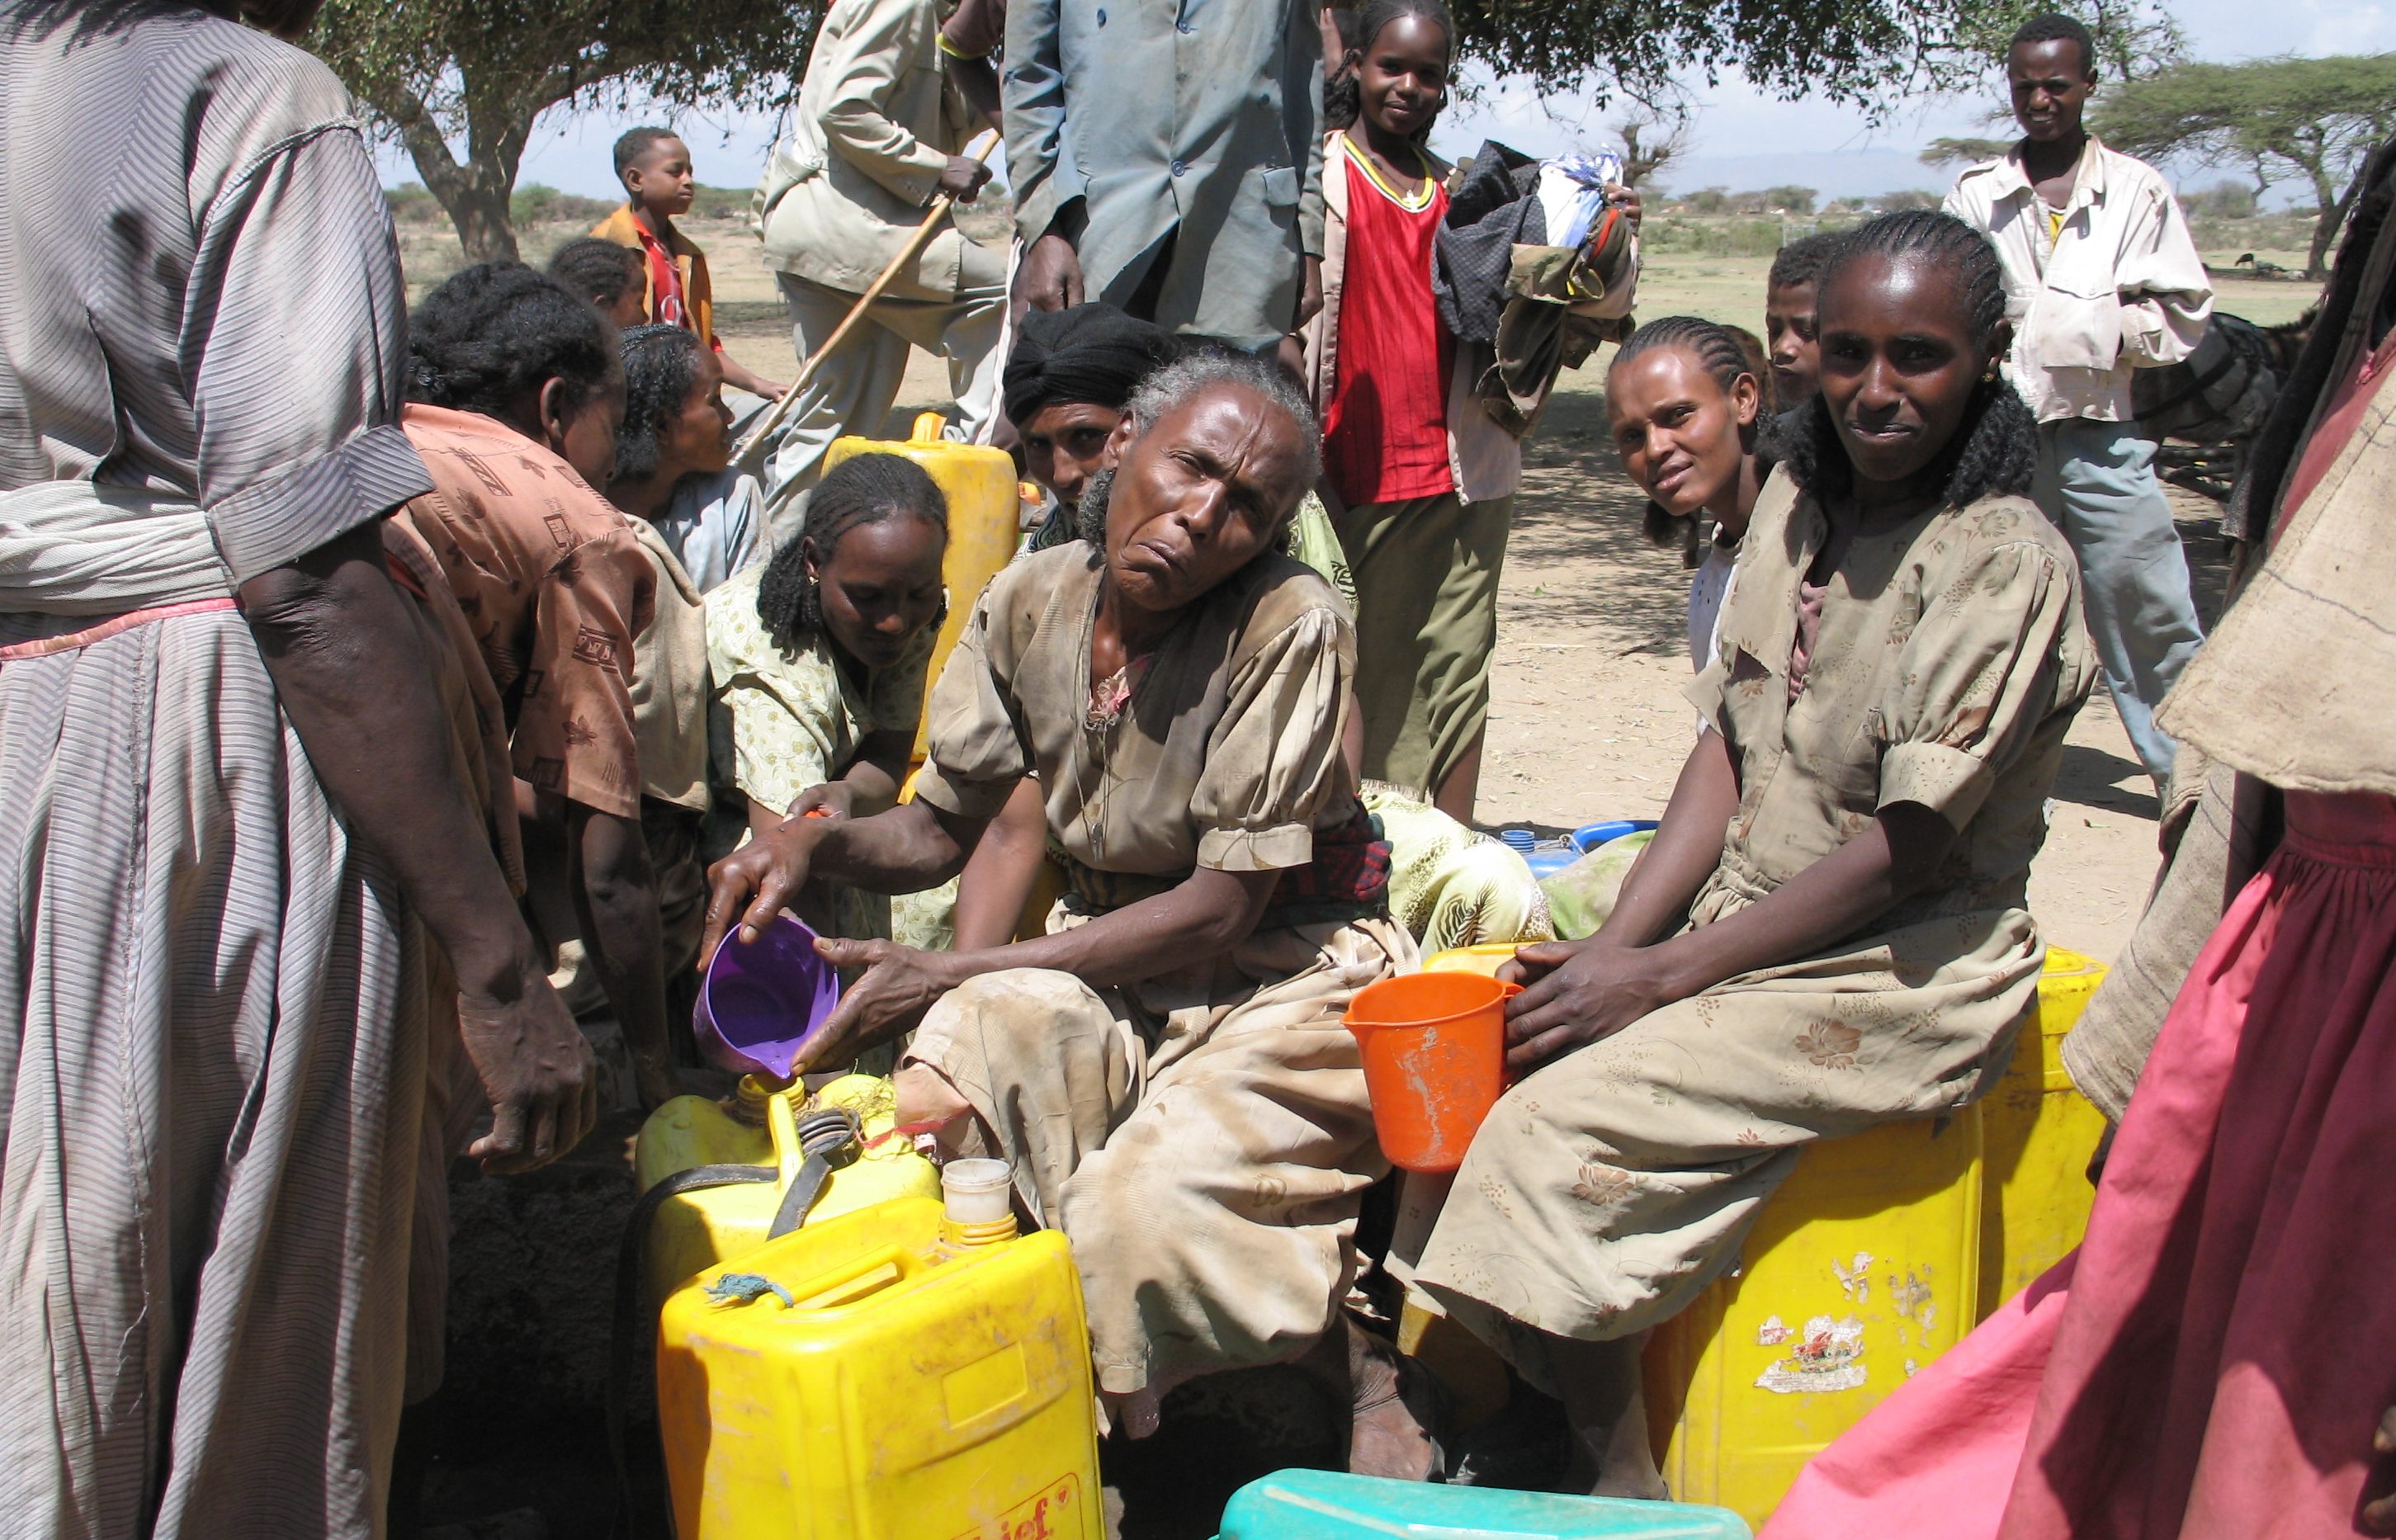 The struggle for drinking water in Eritrea (© Aid to the Church in Need)